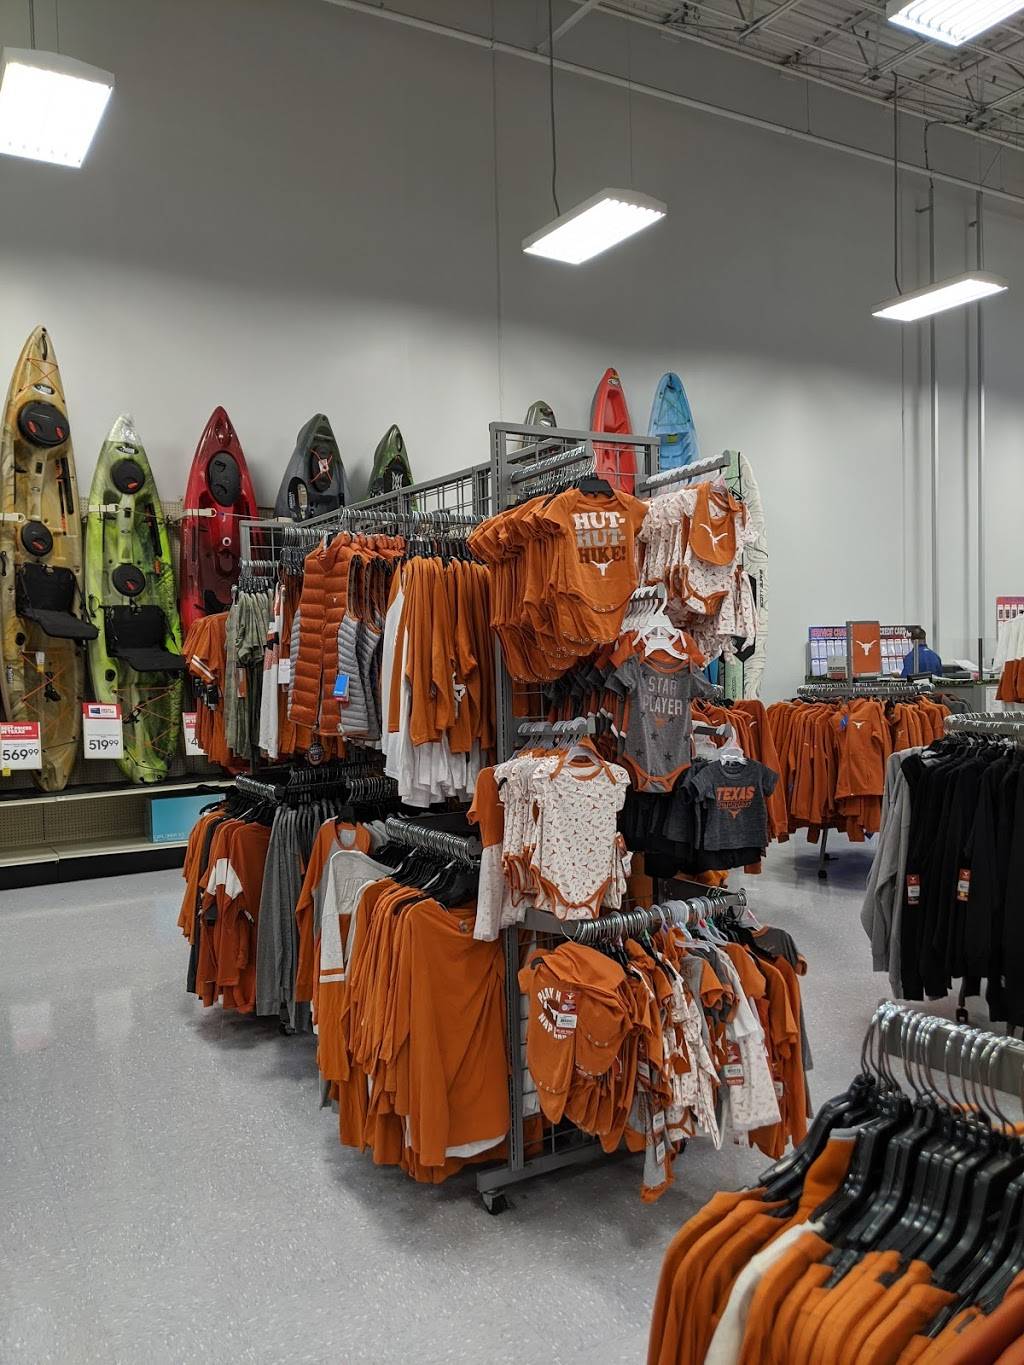 Academy Sports + Outdoors | 5400 Brodie Ln, Sunset Valley, TX 78745, USA | Phone: (512) 891-4240